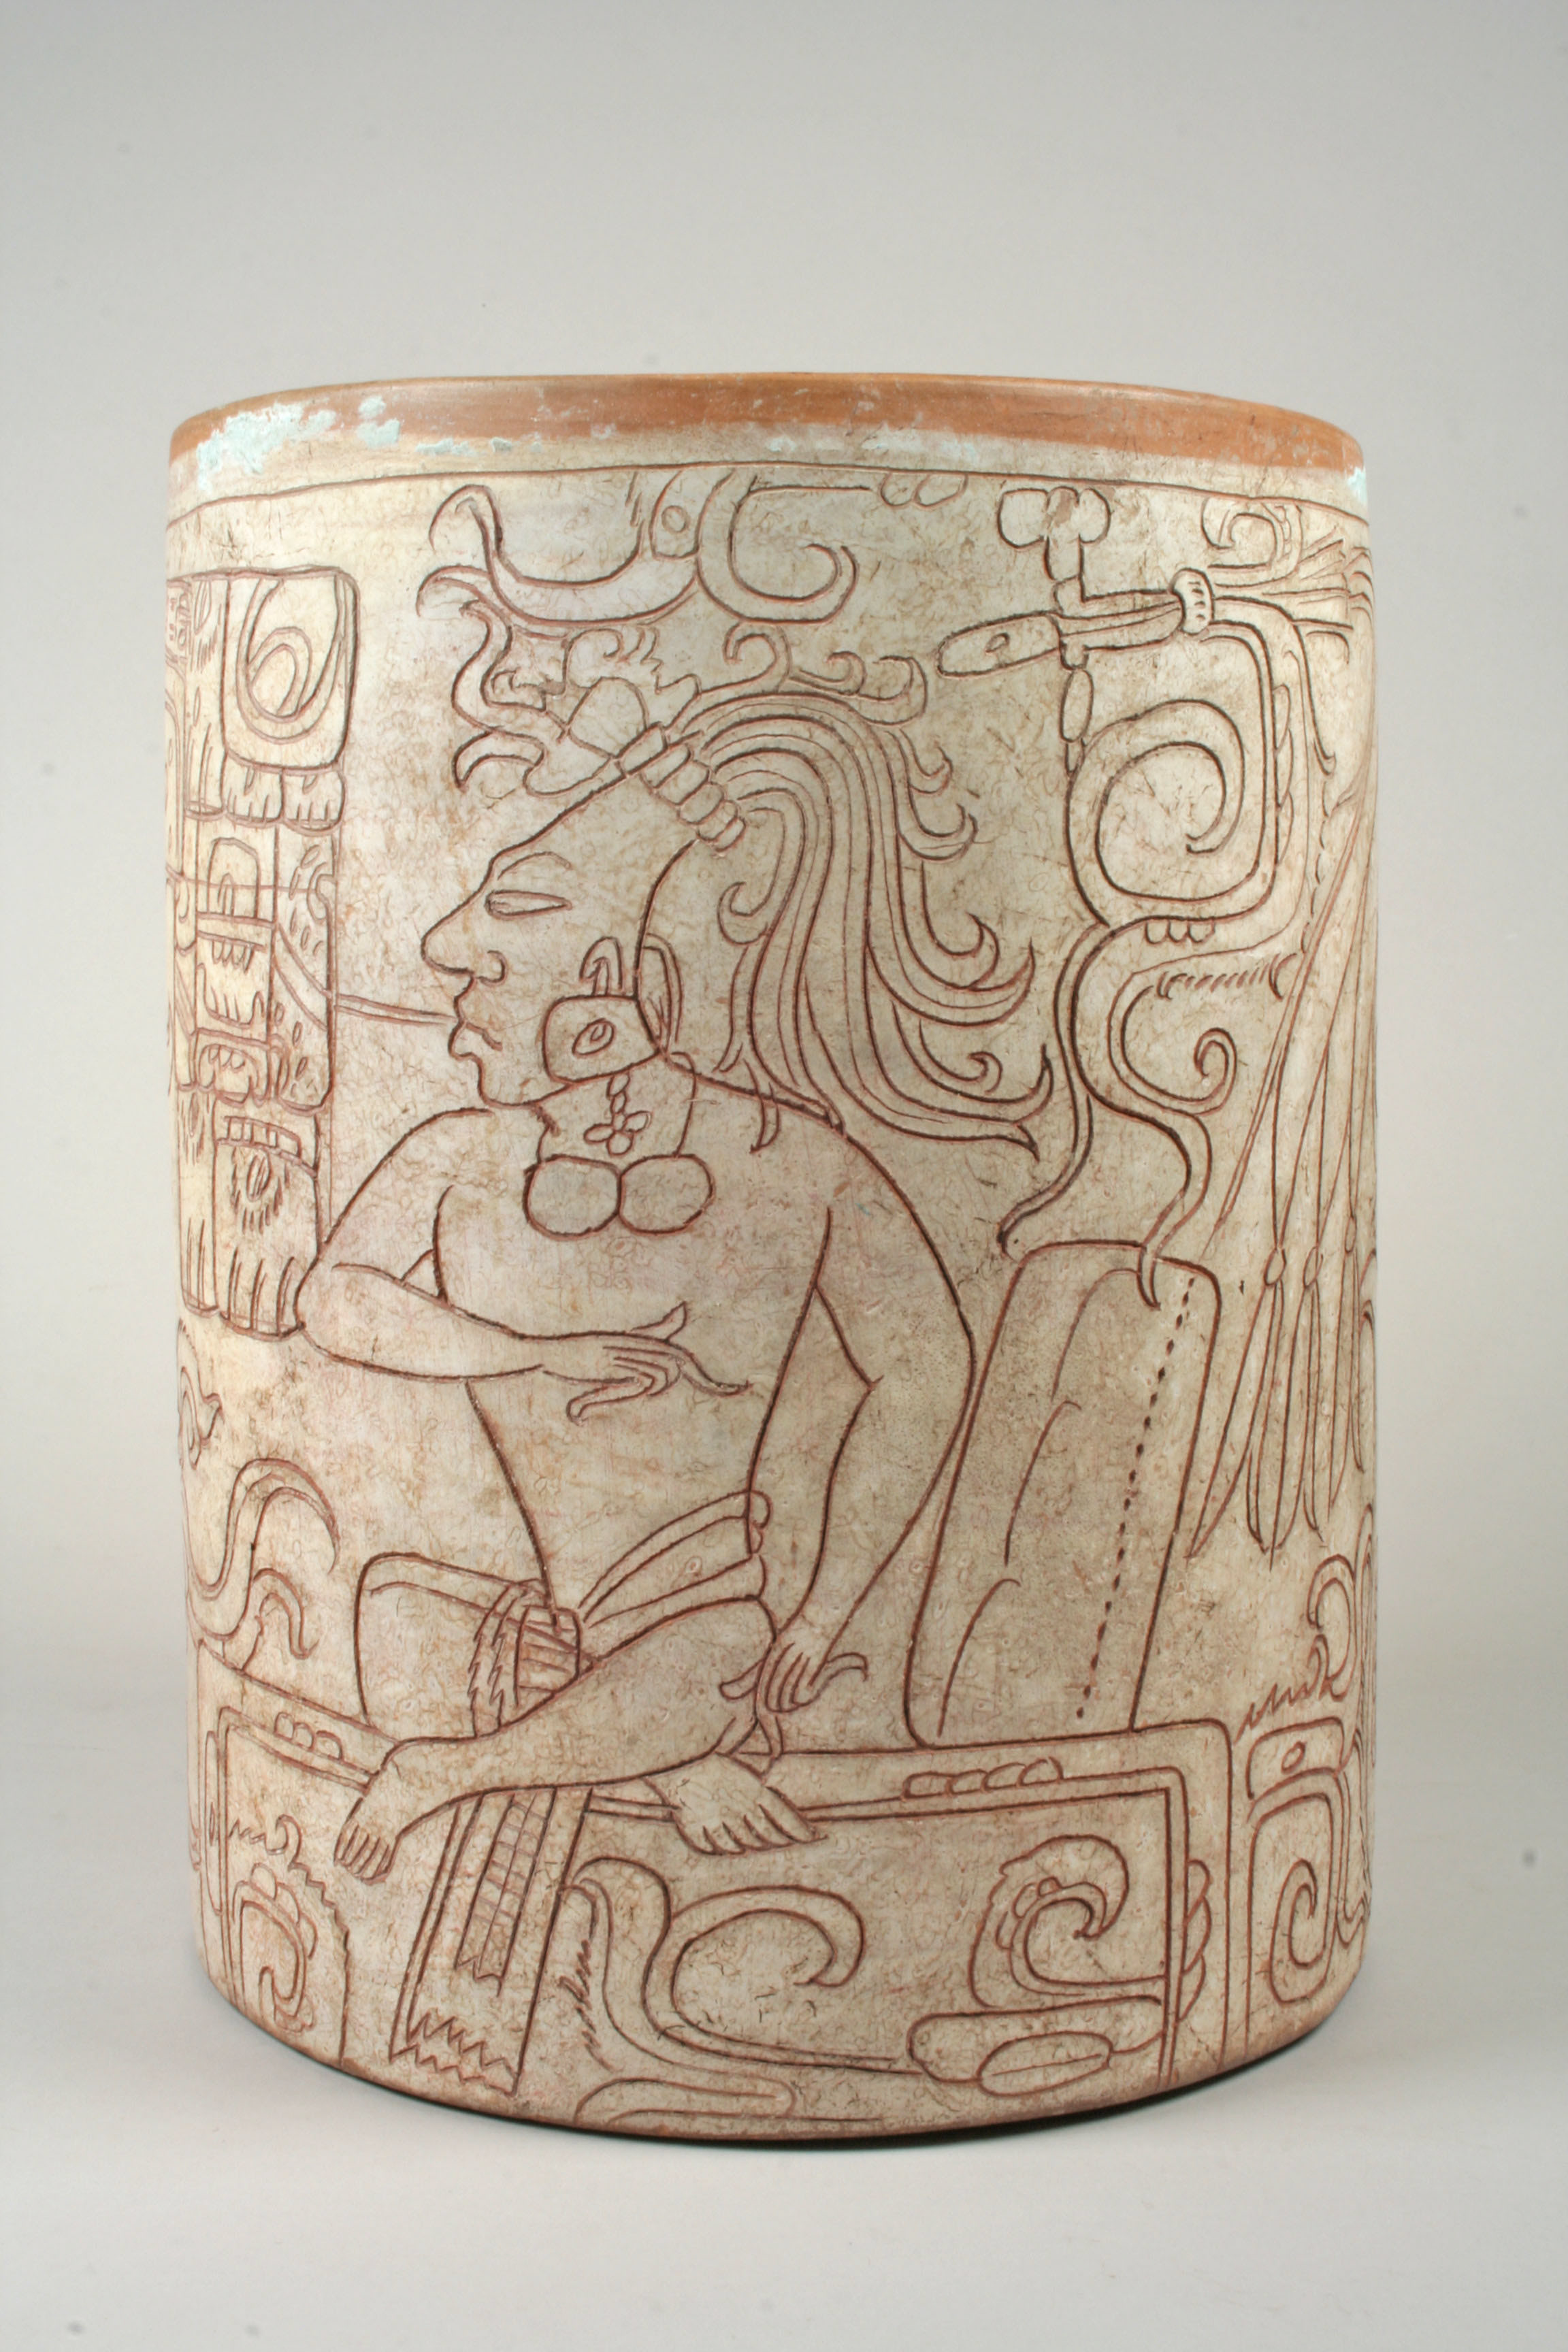 A ceramic cup with a scene of a seated lord carved into the side. 